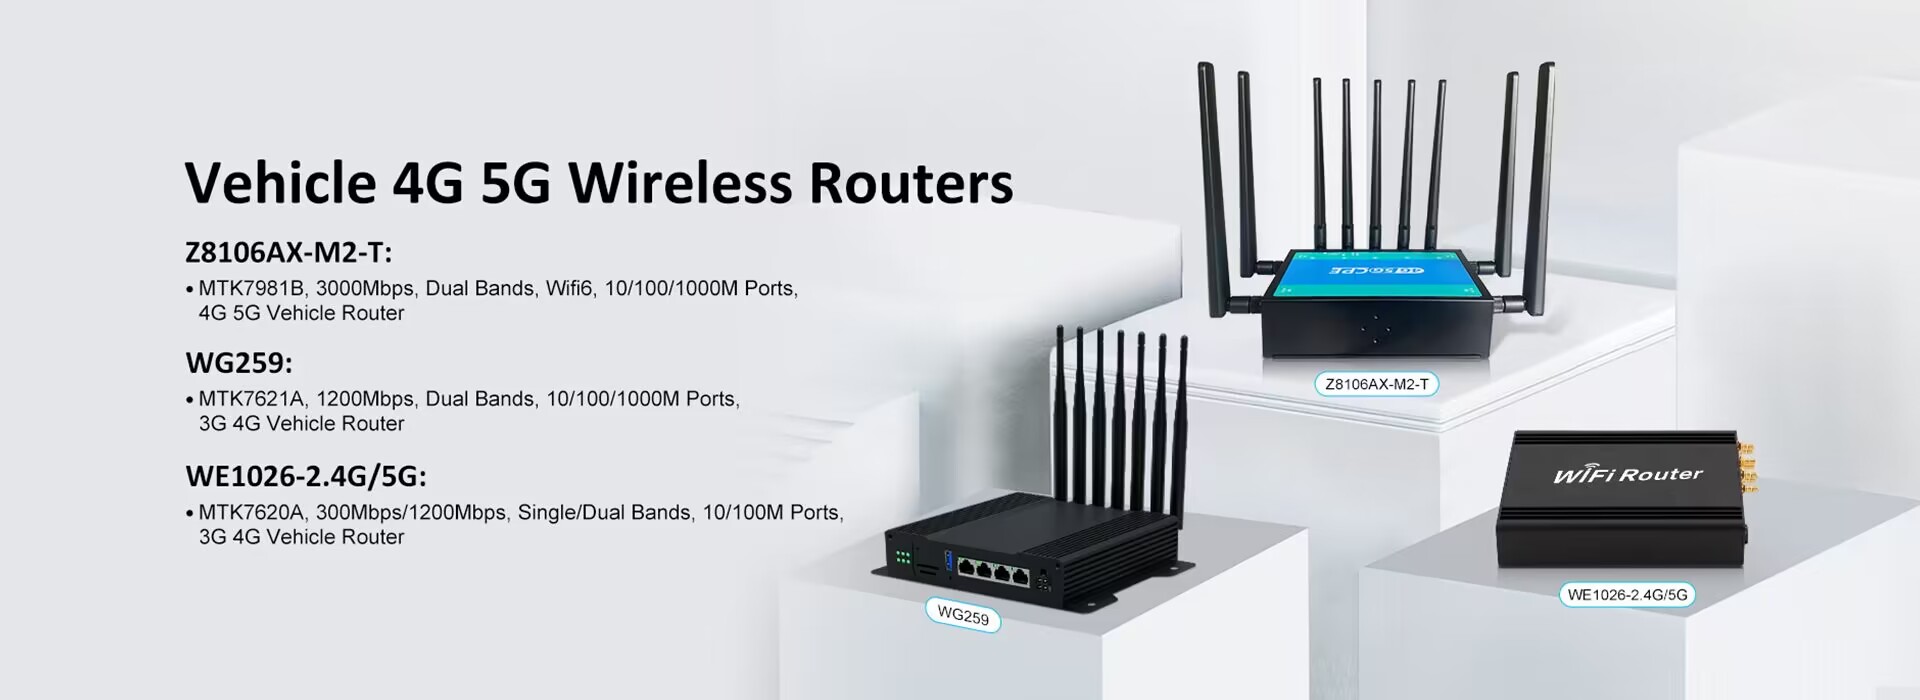 Vehicle 4G 5G Wireless Routers